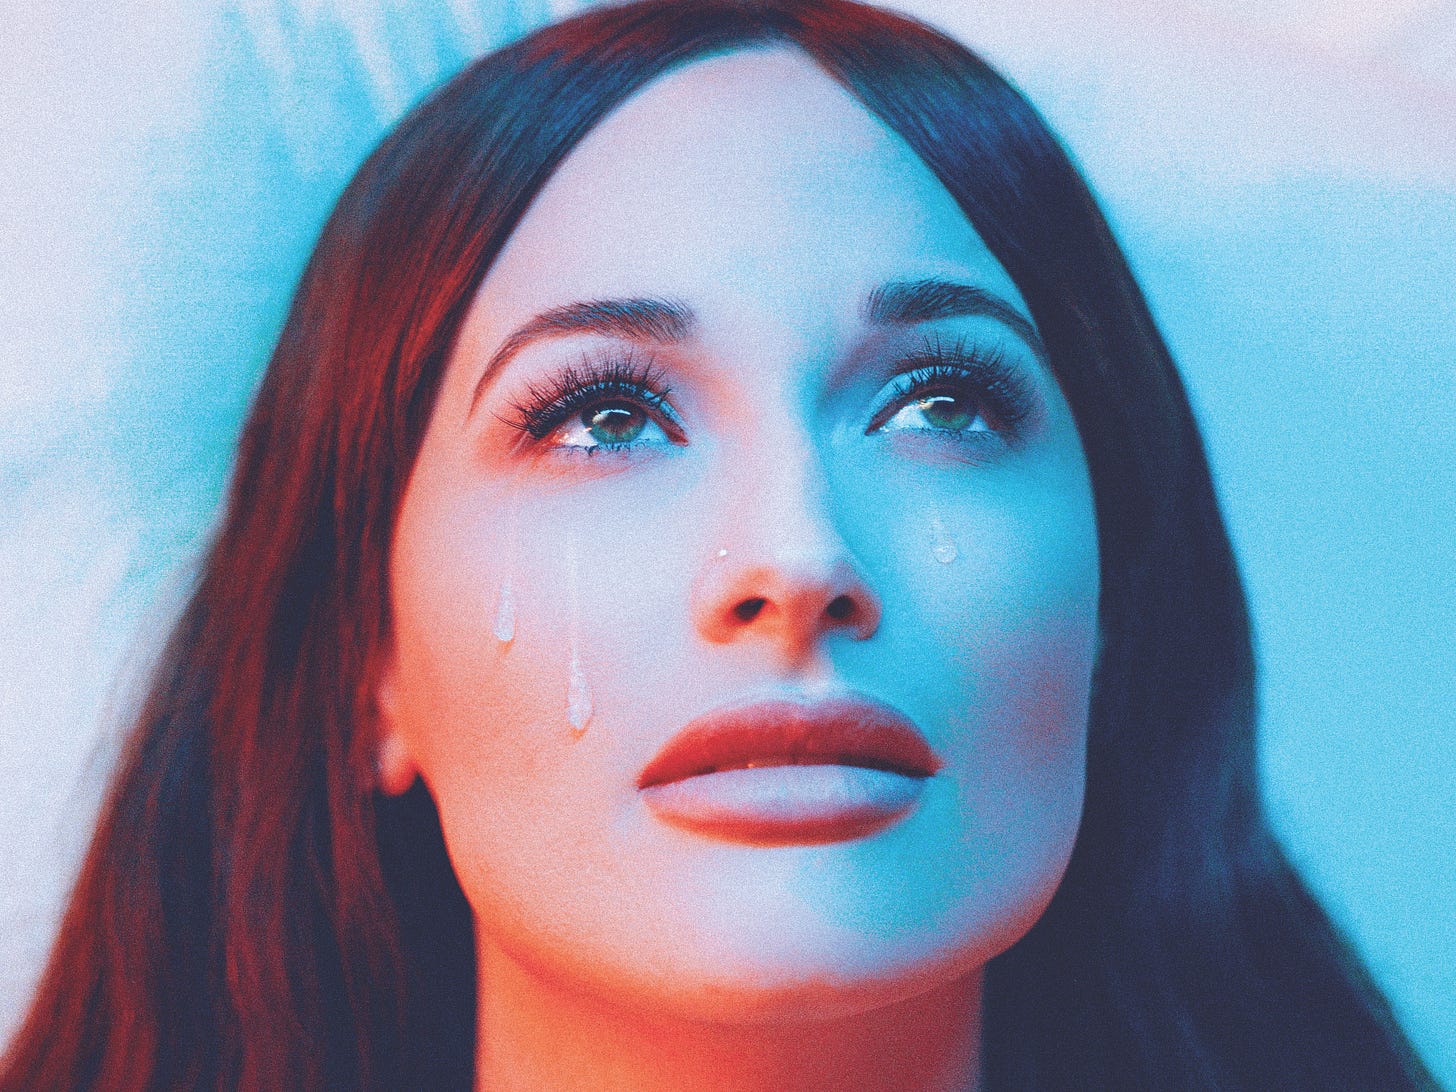 Kacey Musgraves Returns With 'Star-Crossed' : NPR